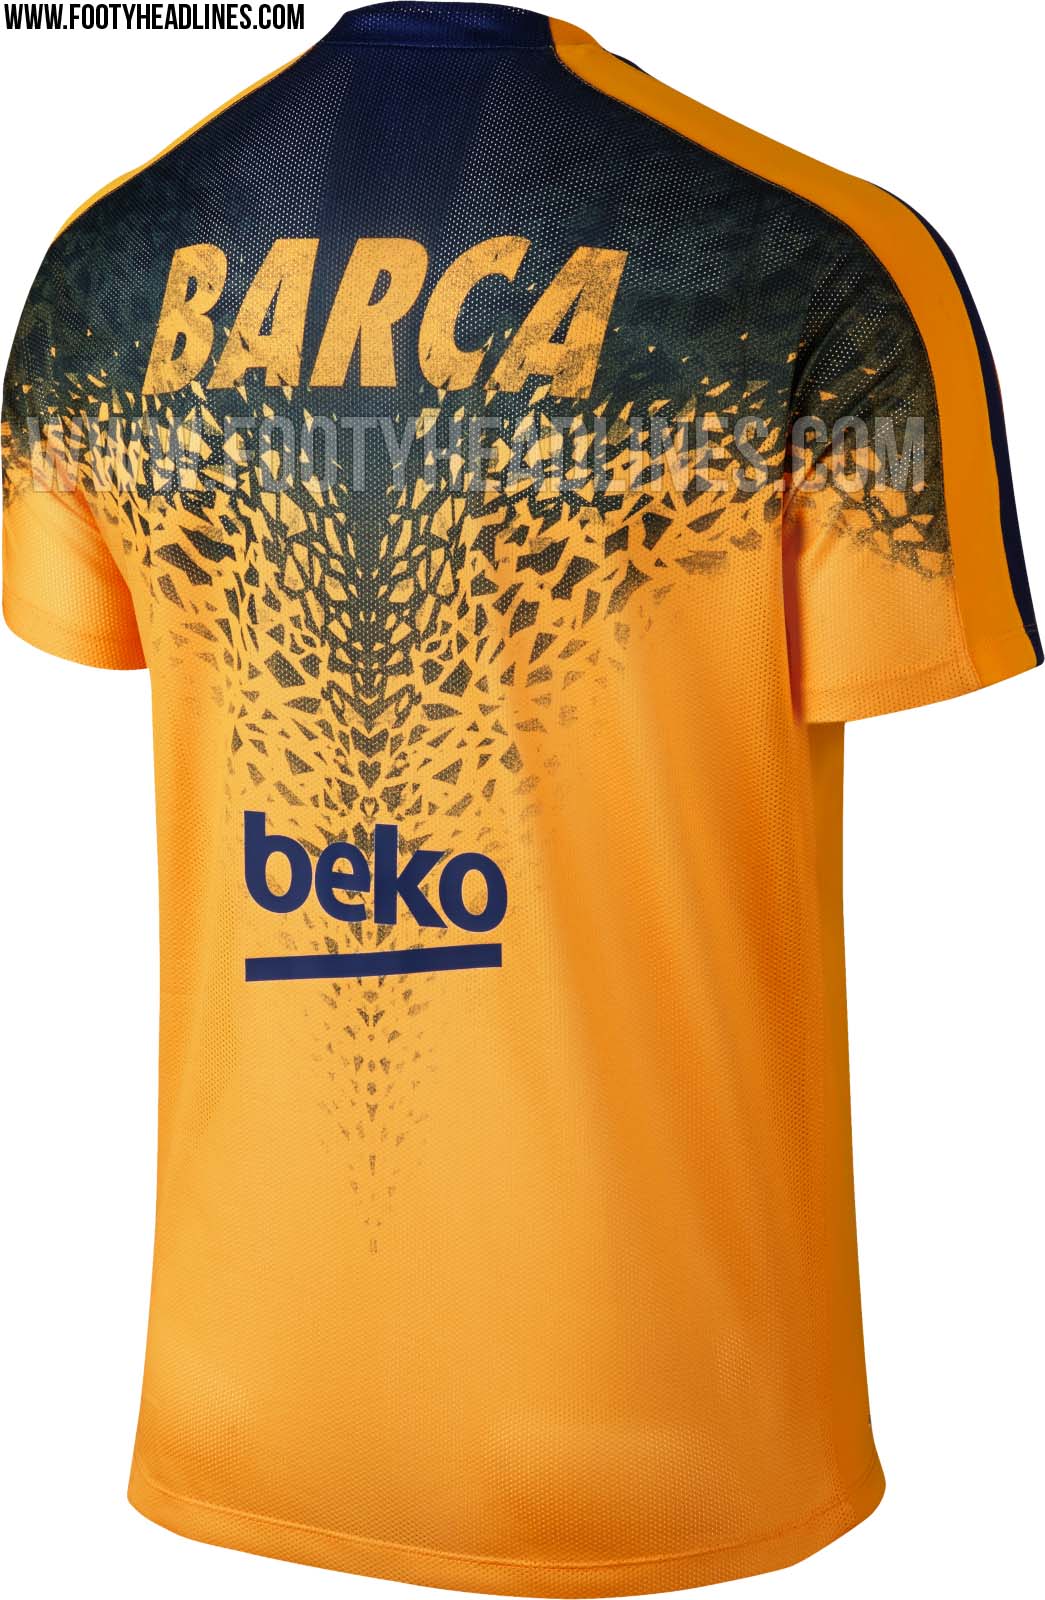 opbouwen consultant Varken FC Barcelona 15-16 Pre-Match and Training Shirts Revealed - Footy Headlines